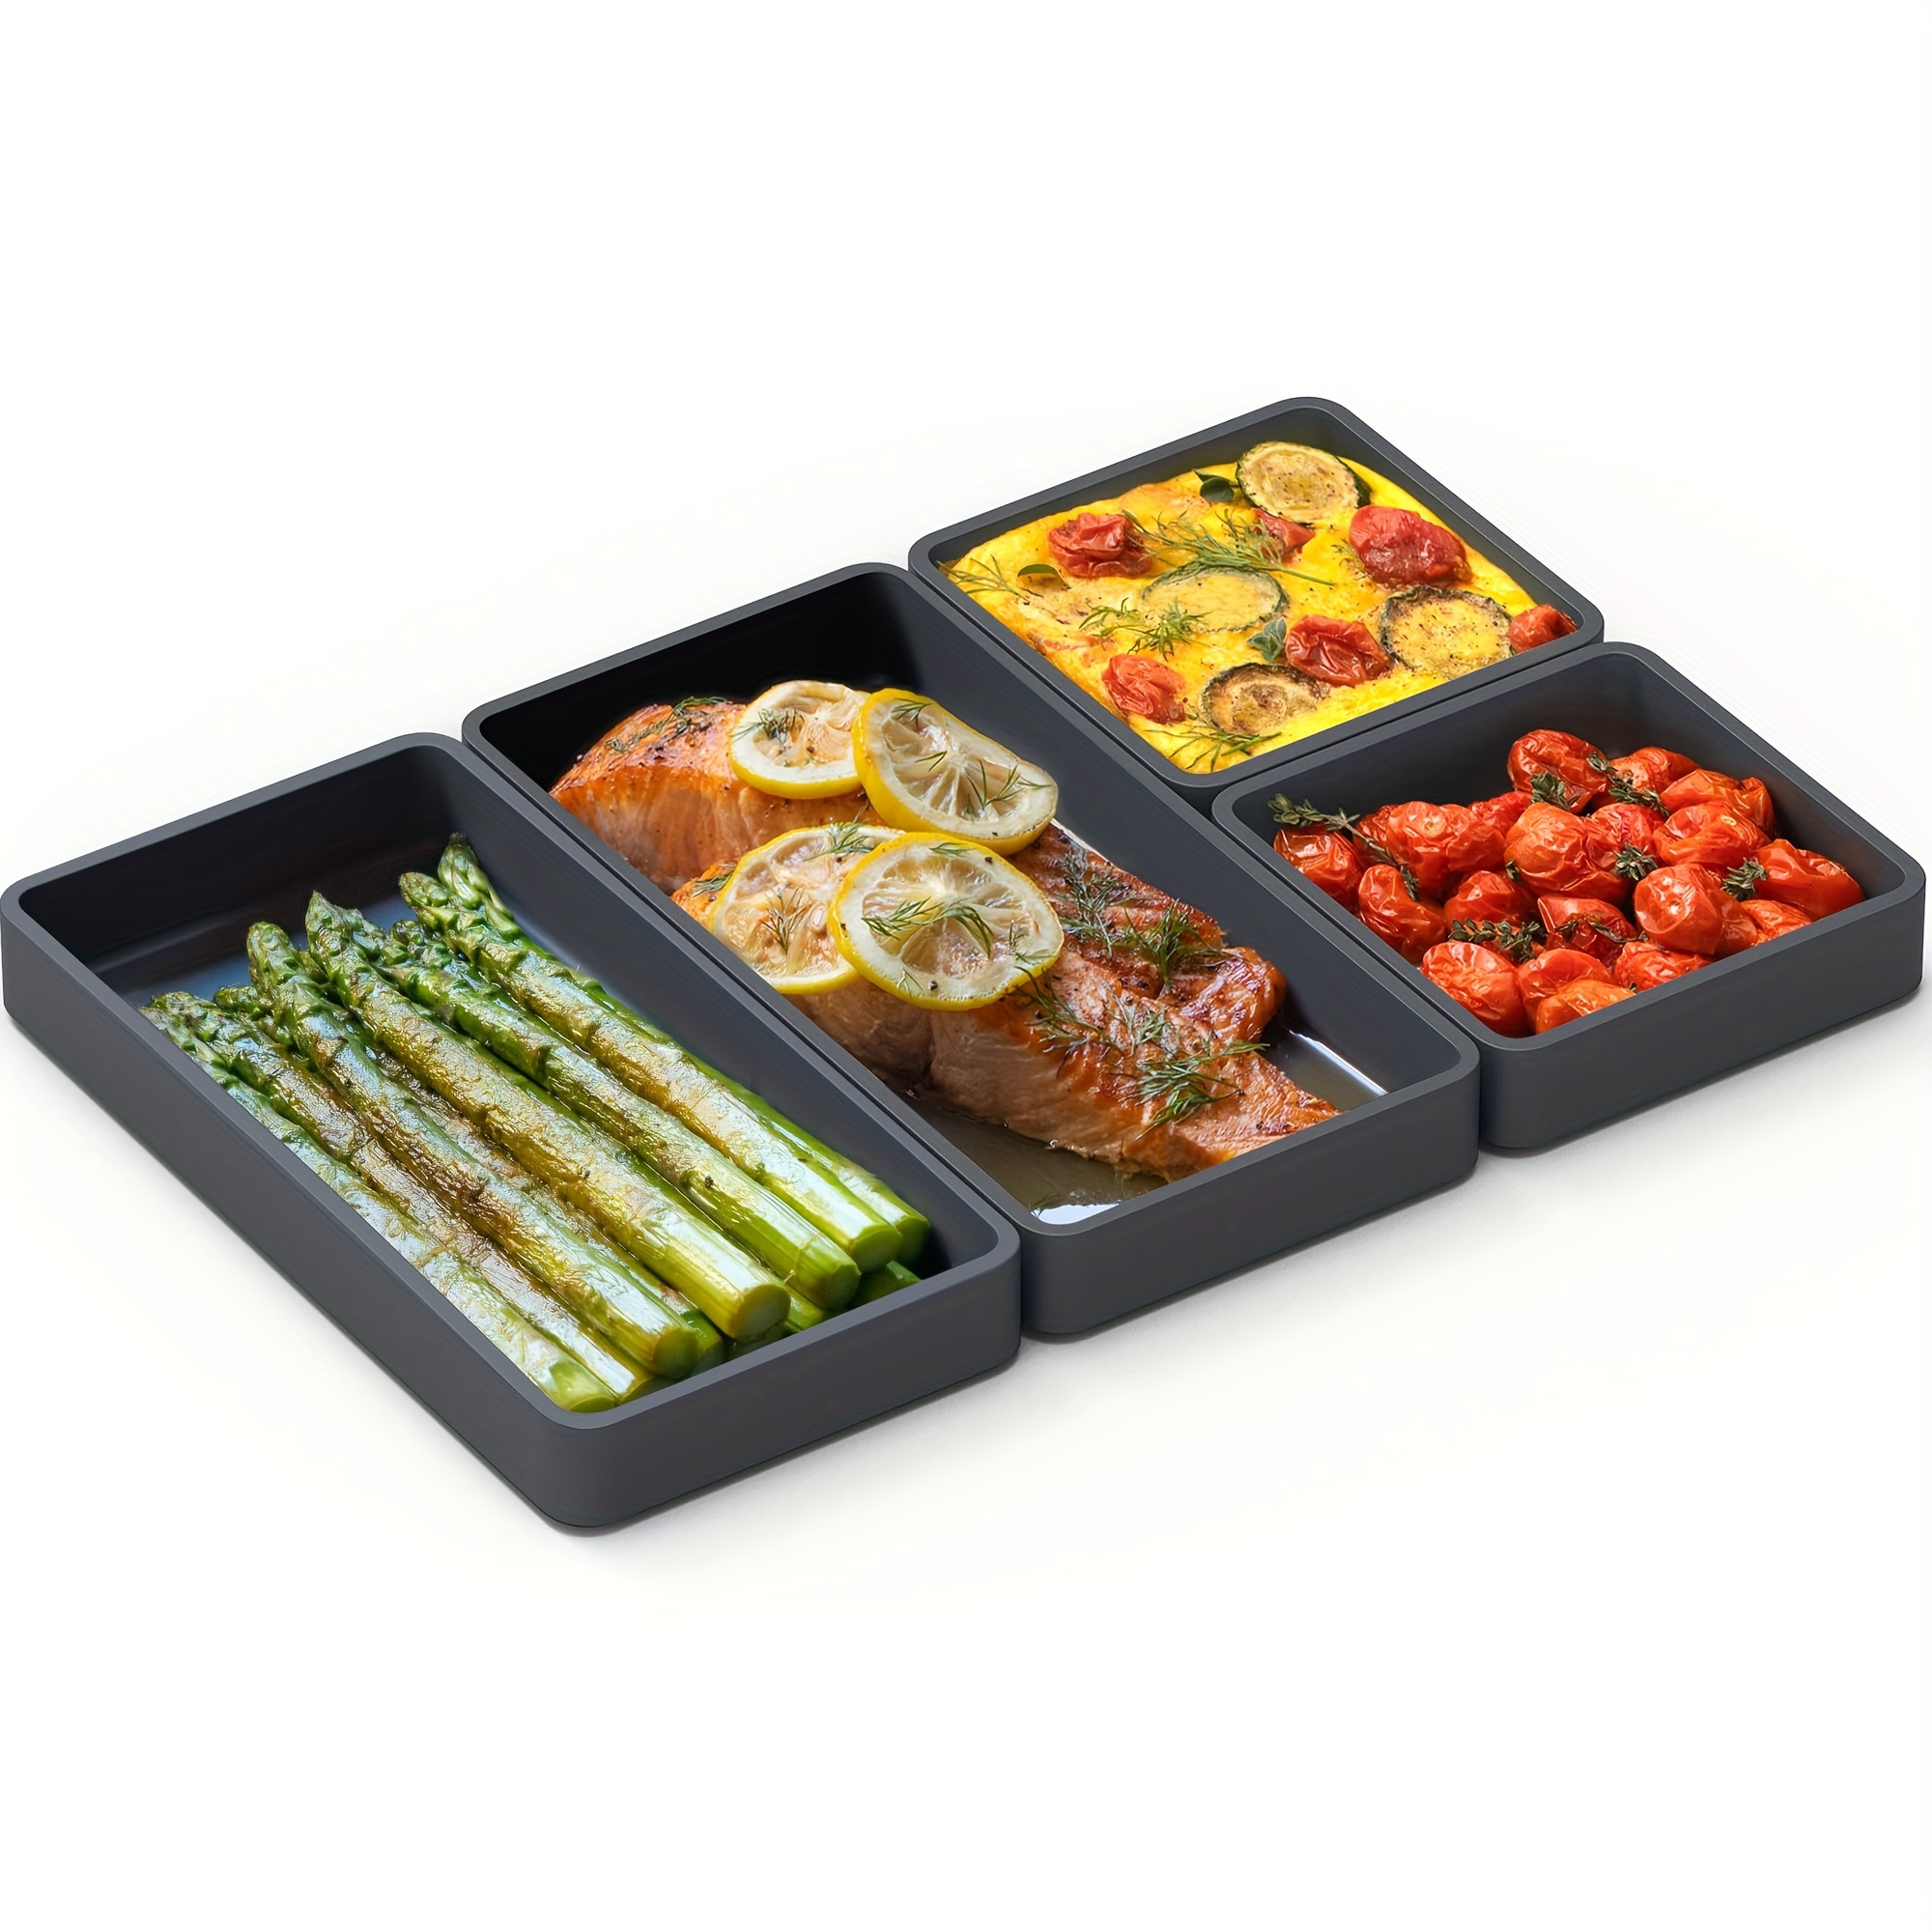 Silicone Sheet Pan Set,4pcs Silicone Dividers For Baking Trays